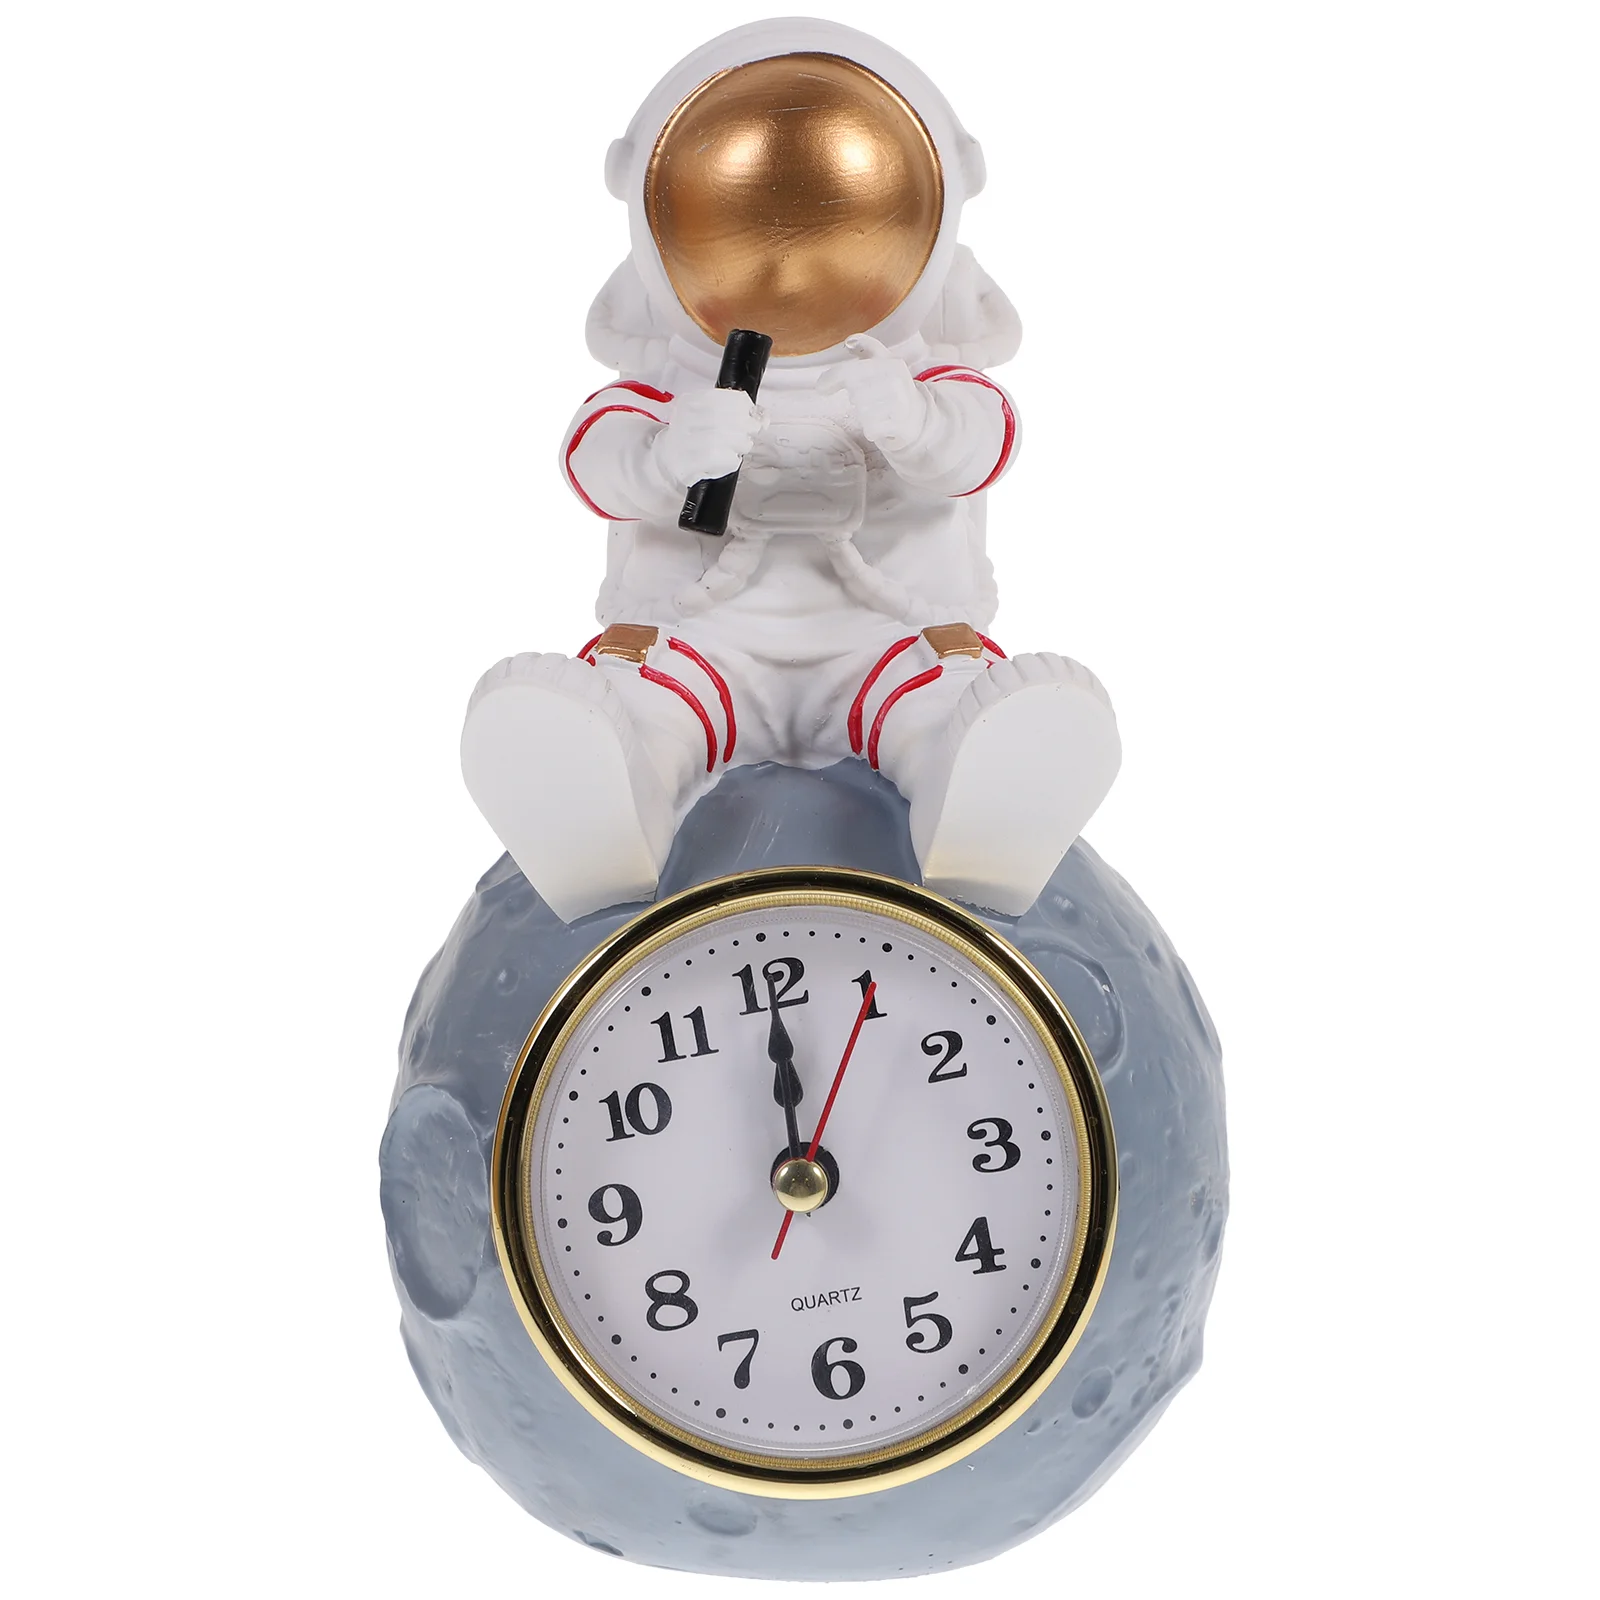 

1pc Astronaut Themed Design Clock Adornment without (Assorted Color) Wall